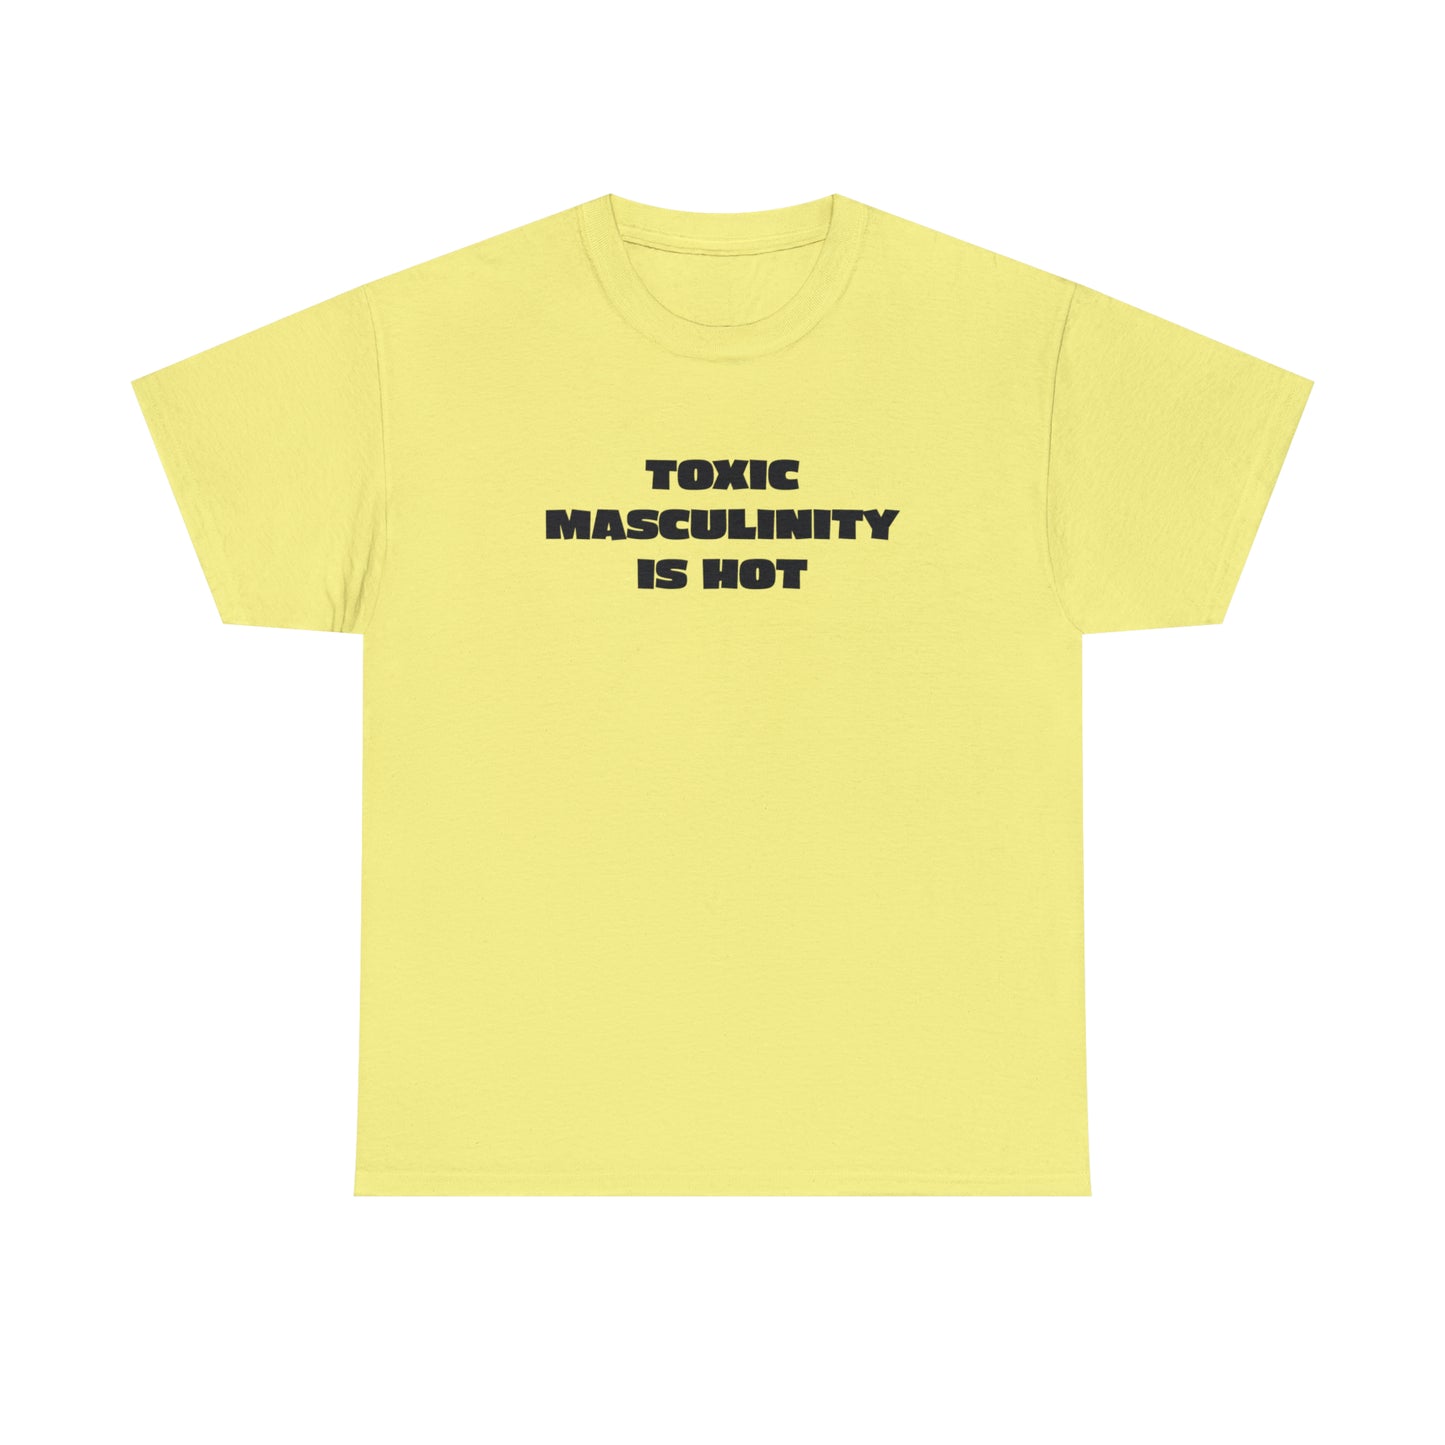 Toxic Masculinity T Shirt For Conservative T-Shirt For Rebel TShirt For Freedom Of Speech Tee